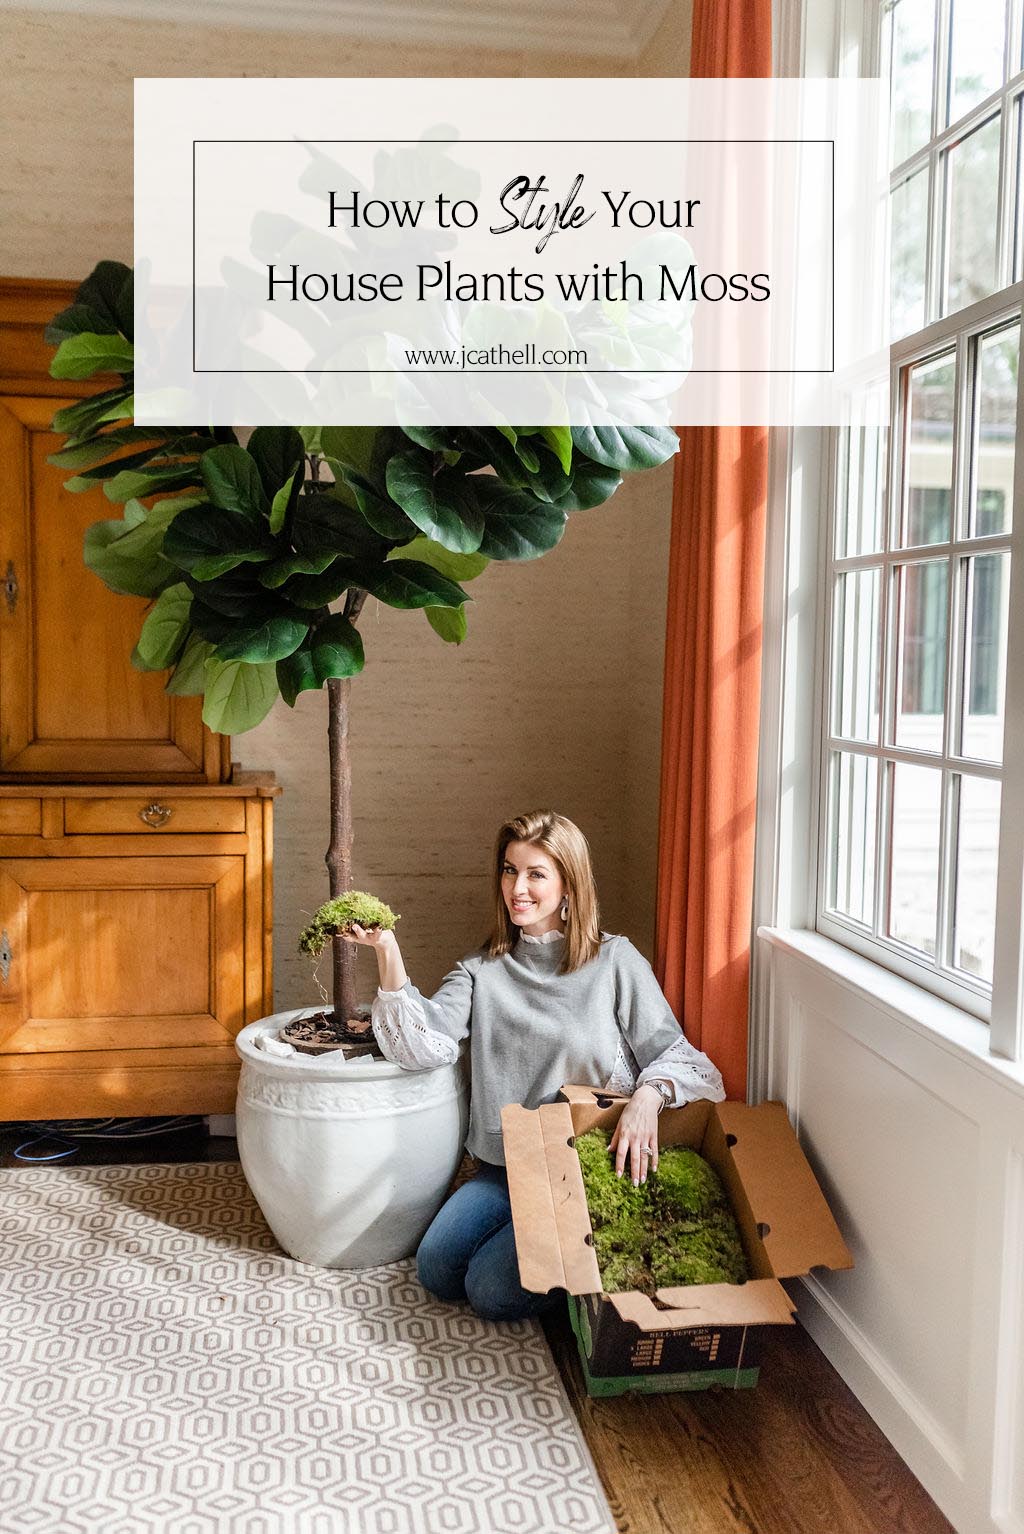 How to Style Your House Plants with Moss - J. Cathell